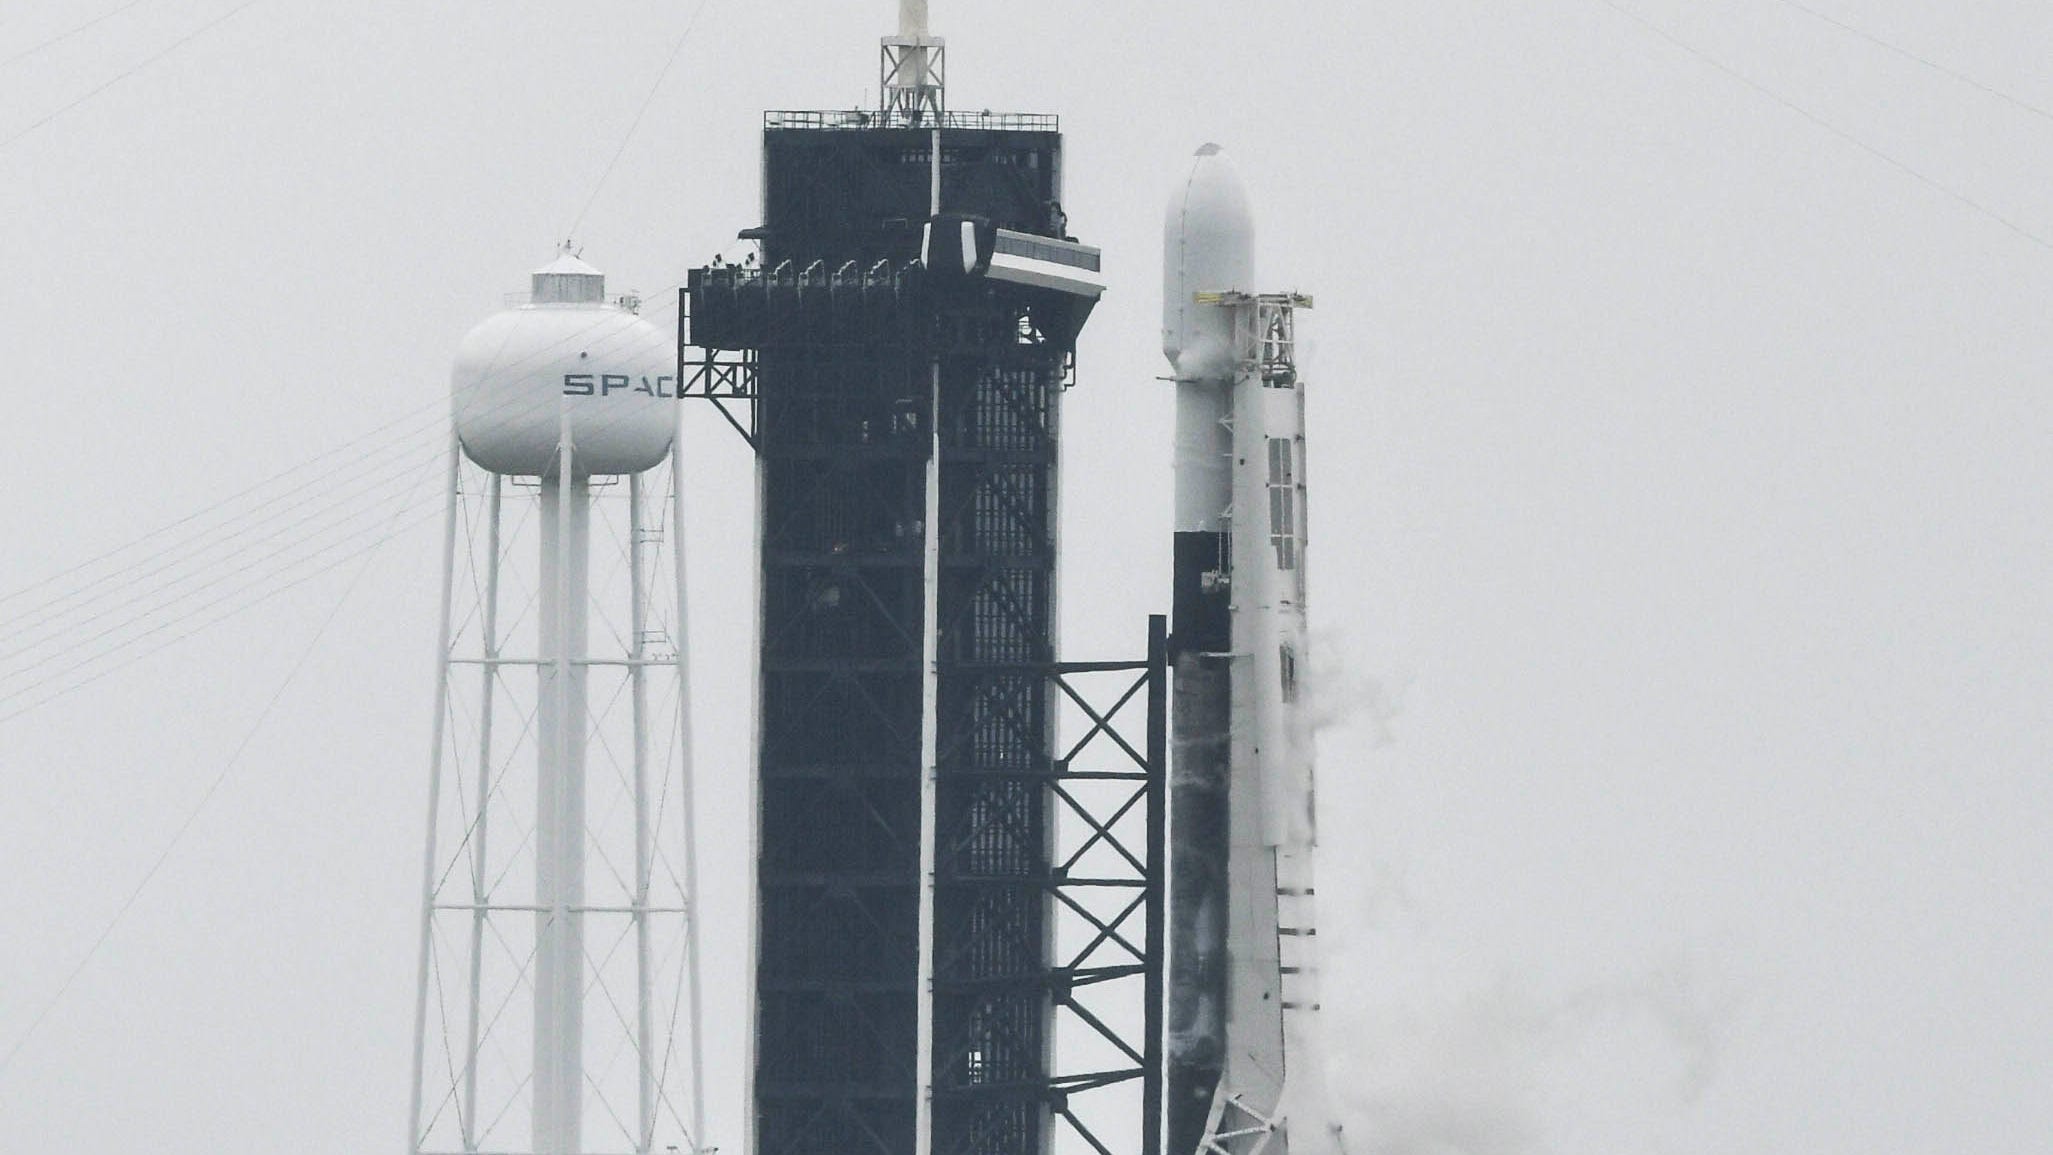 A SpaceX Falcon 9 rocket sits on pad 39A at Kenned